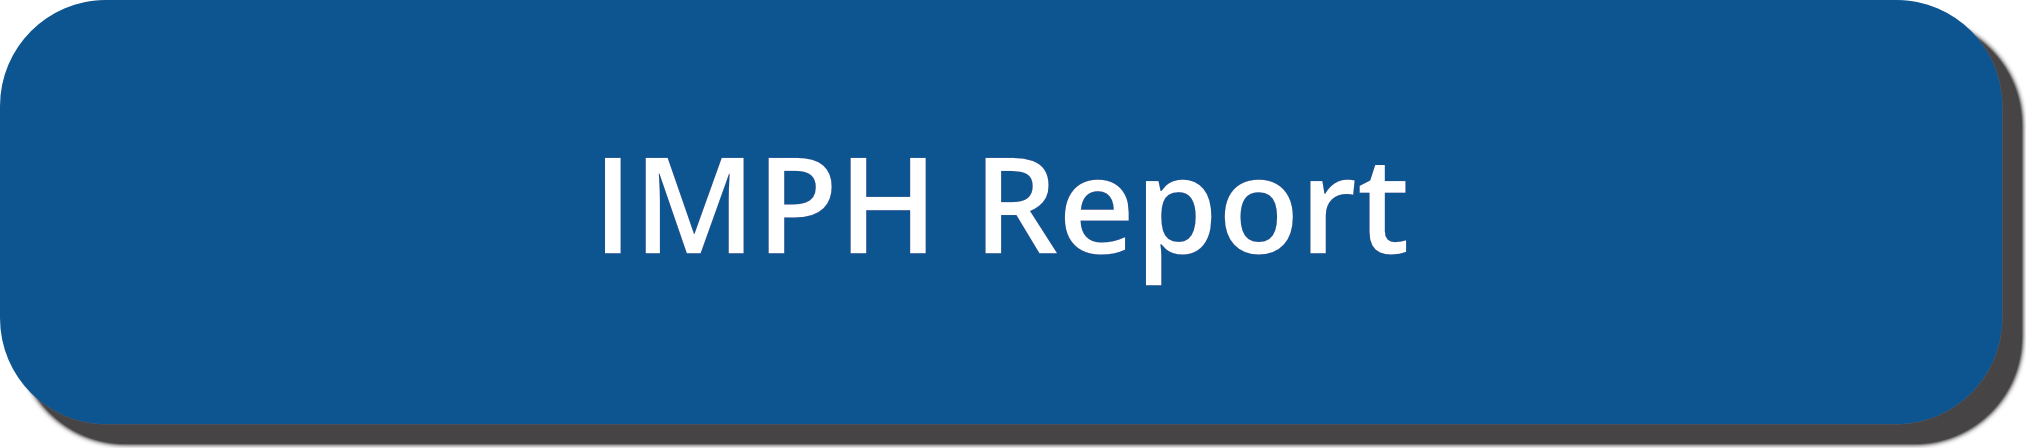 IMPH Report Button Link